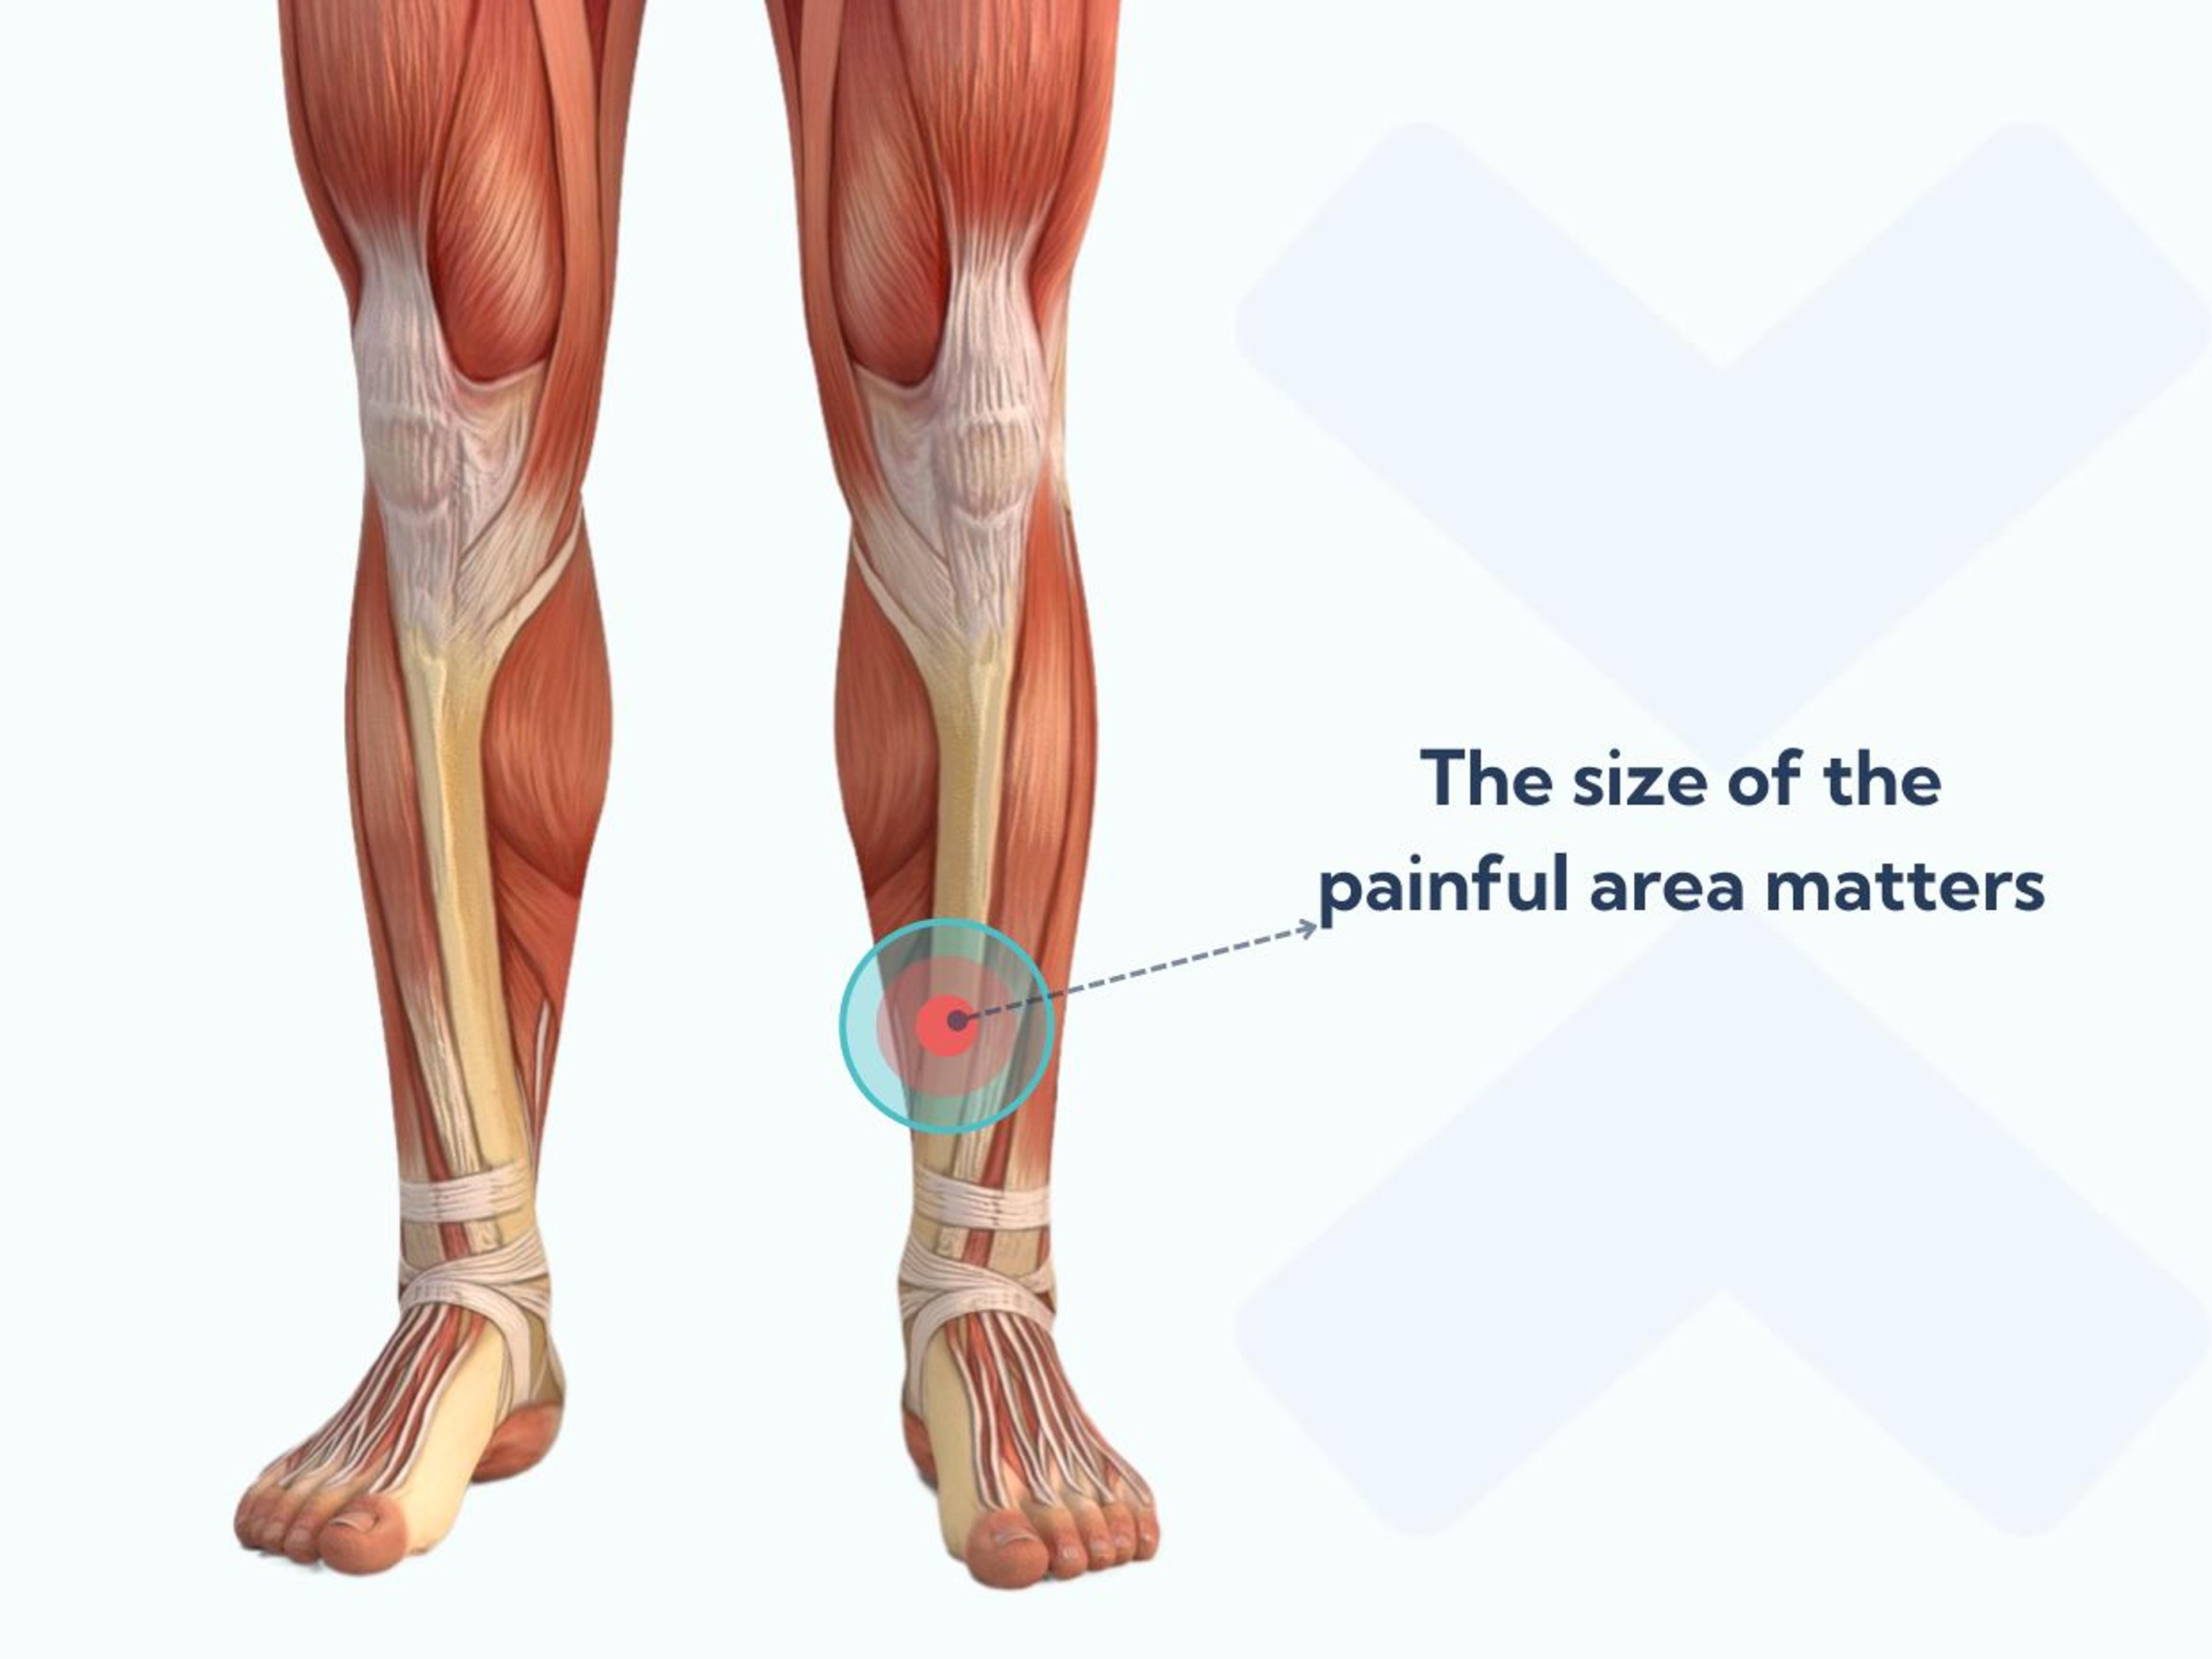 If your inner shin pain is concentrated in a small area (fewer than 10cm long) it may not be shin splints. You may have a stress fracture instead.